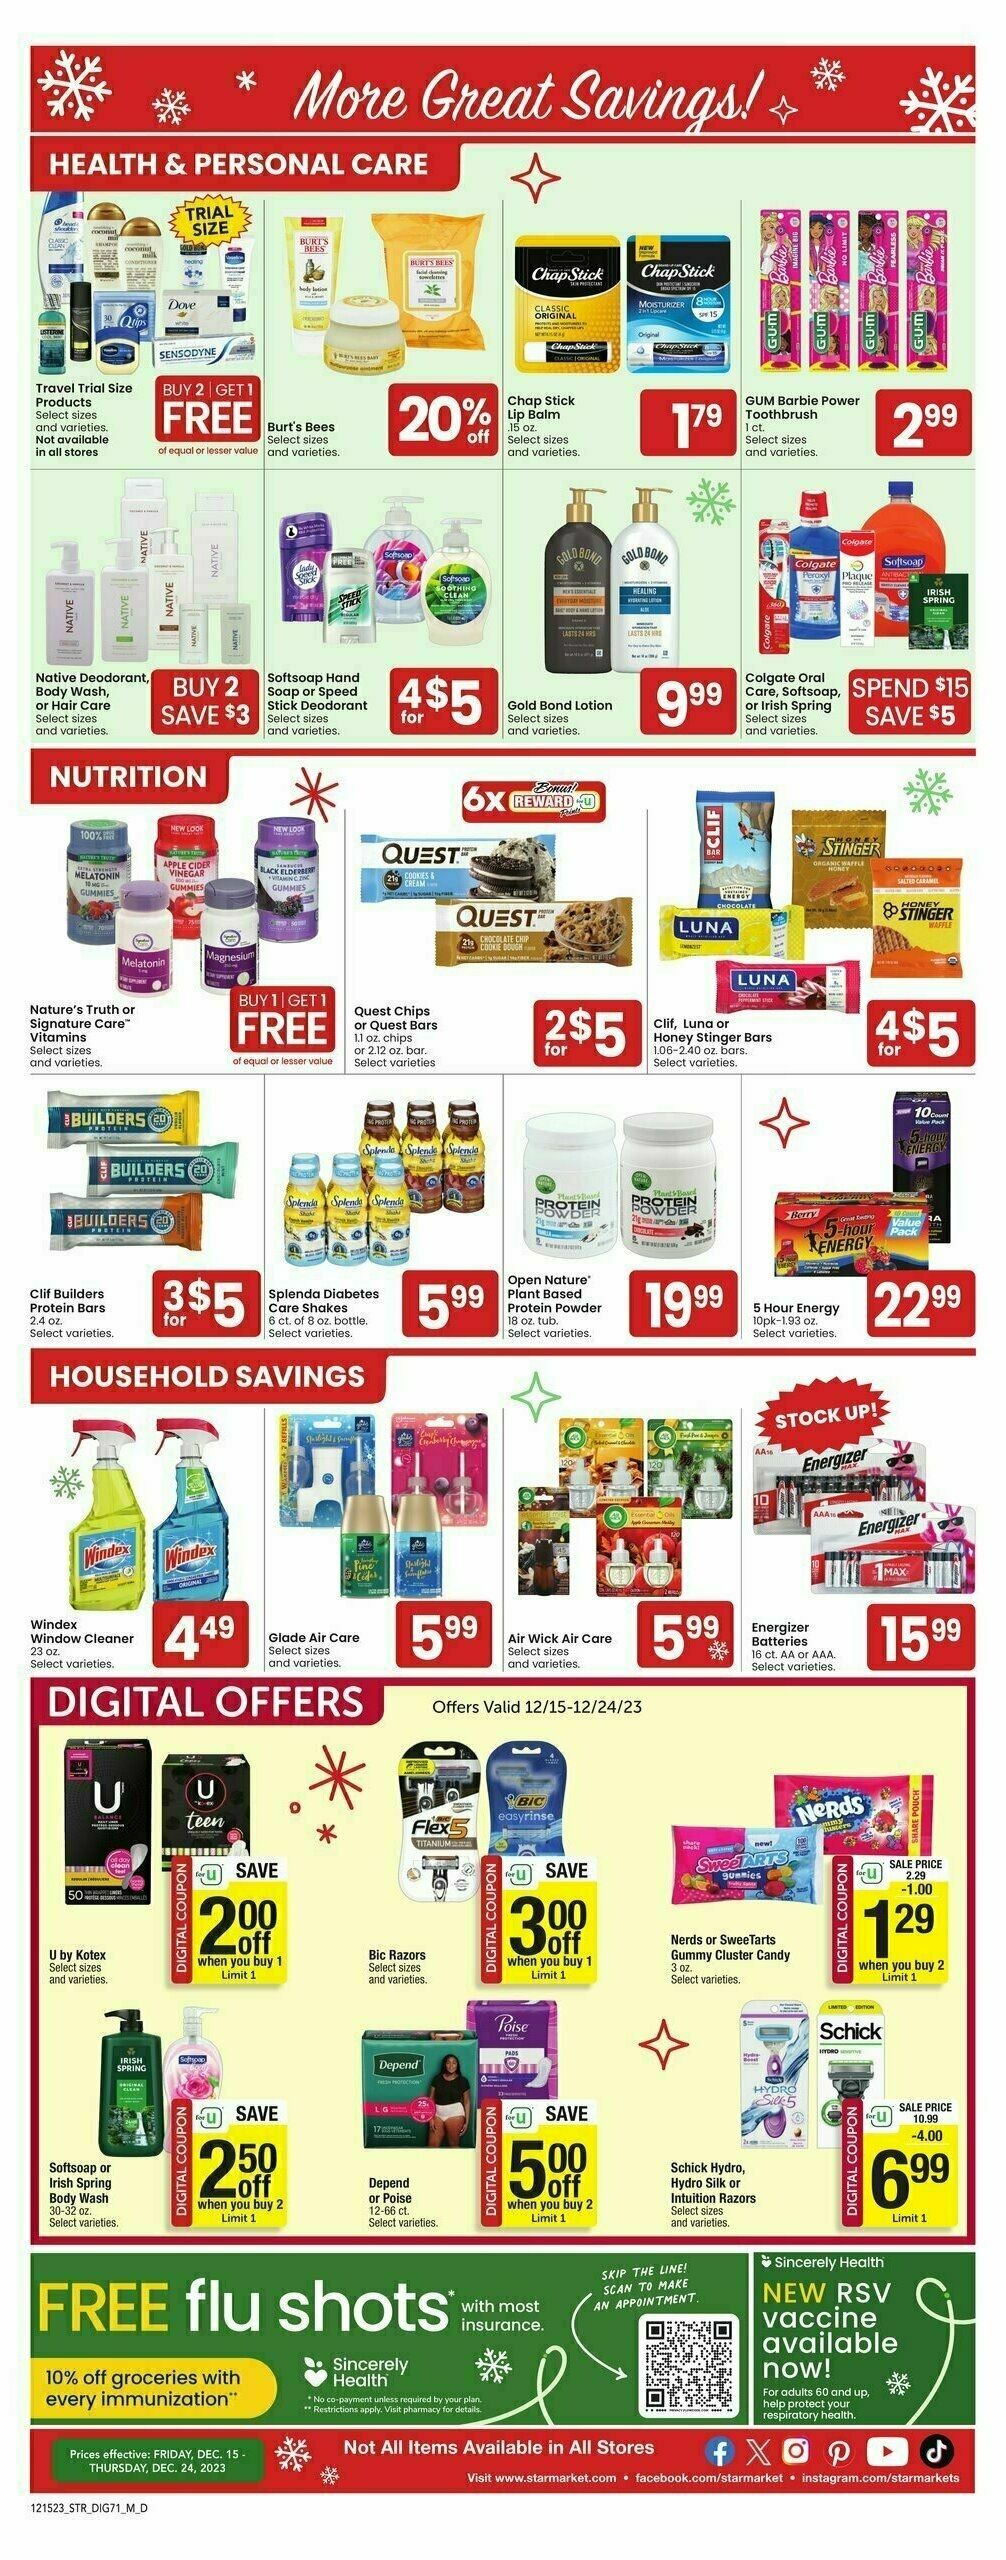 Star Market Additional Savings Weekly Ad from December 15